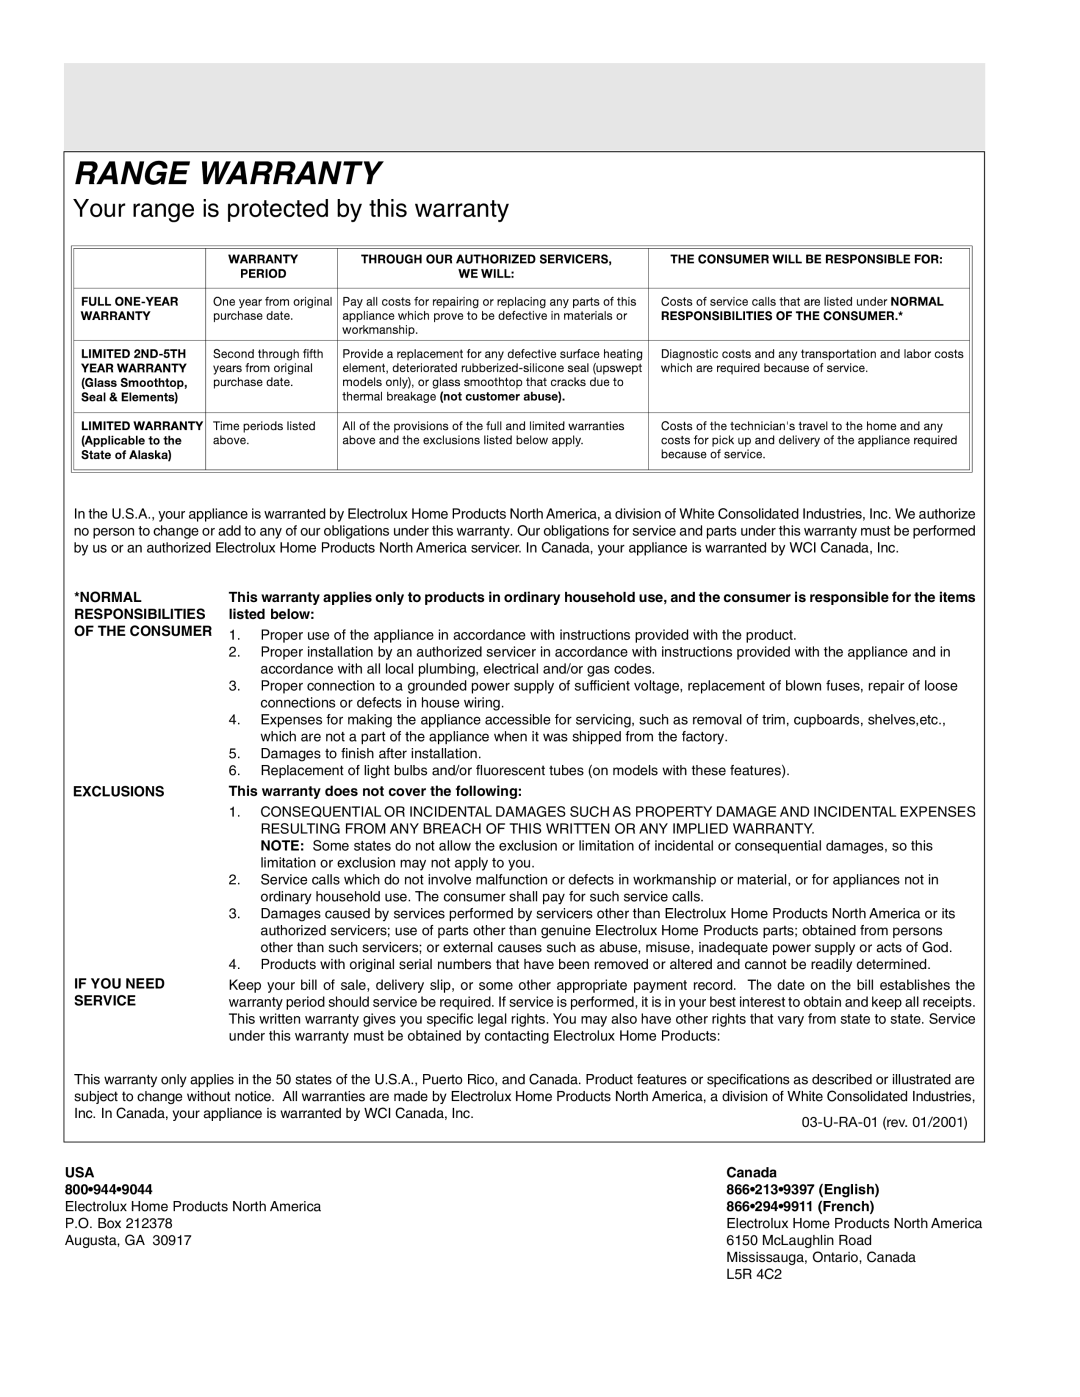 Frigidaire 316135917 important safety instructions Range Warranty, Your range is protected by this warranty, Service 